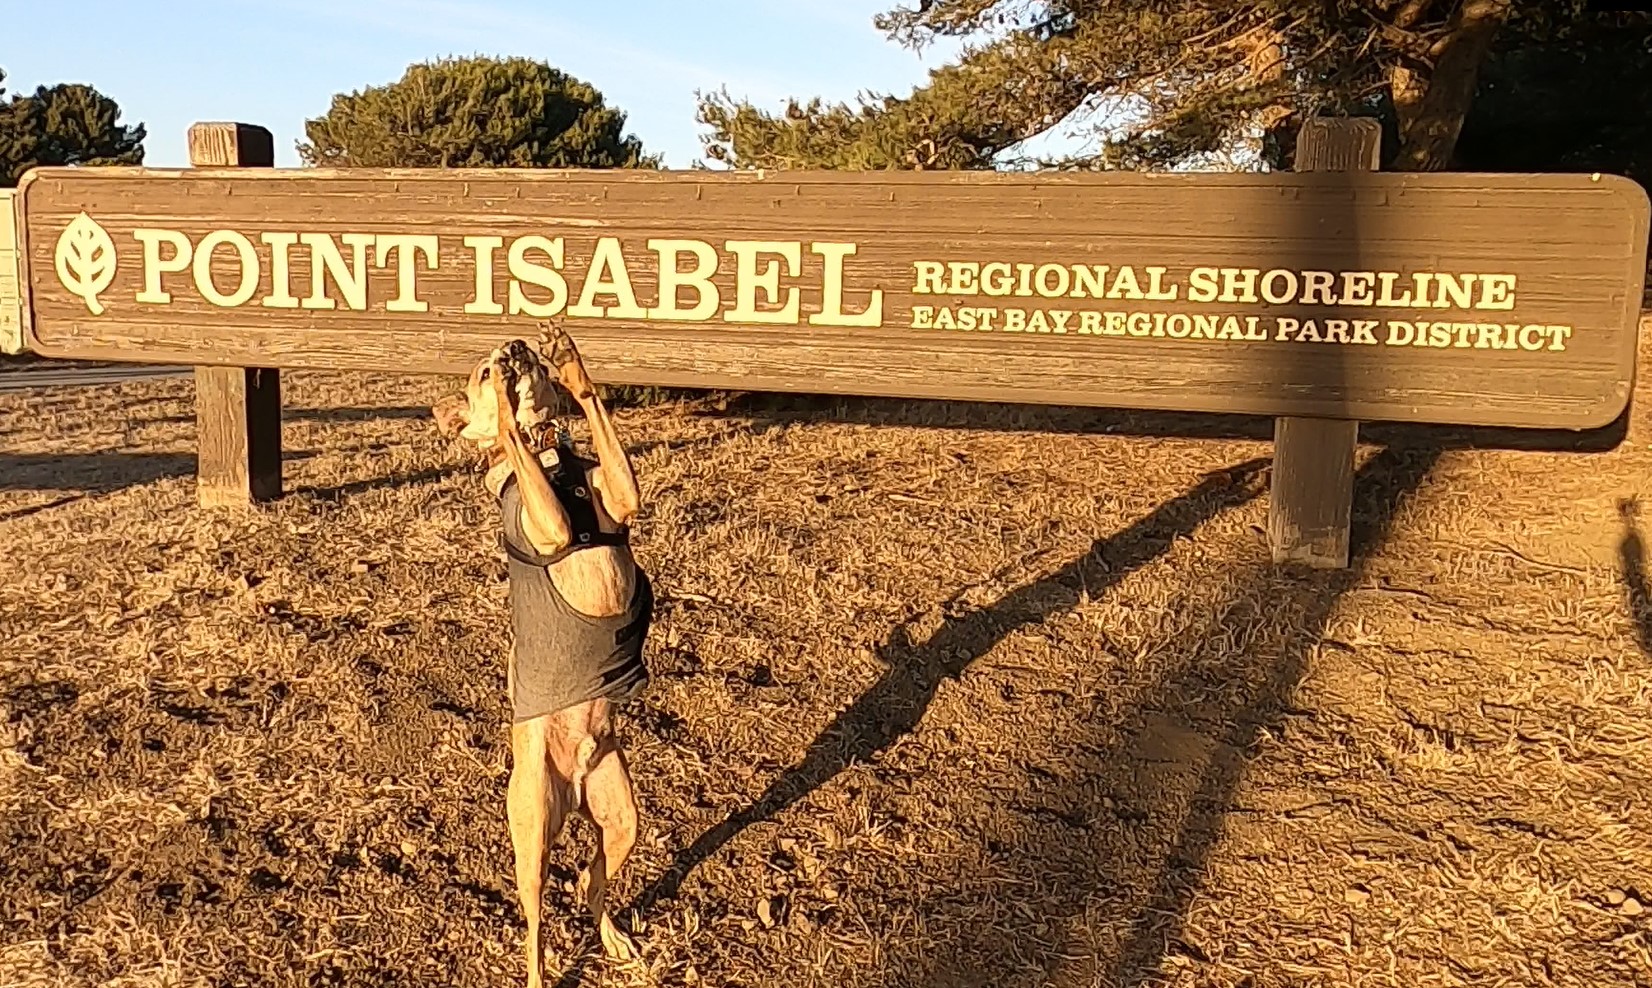 POINT ISABEL DOG PARK: Dog-friendly Contra Costa County East Bay